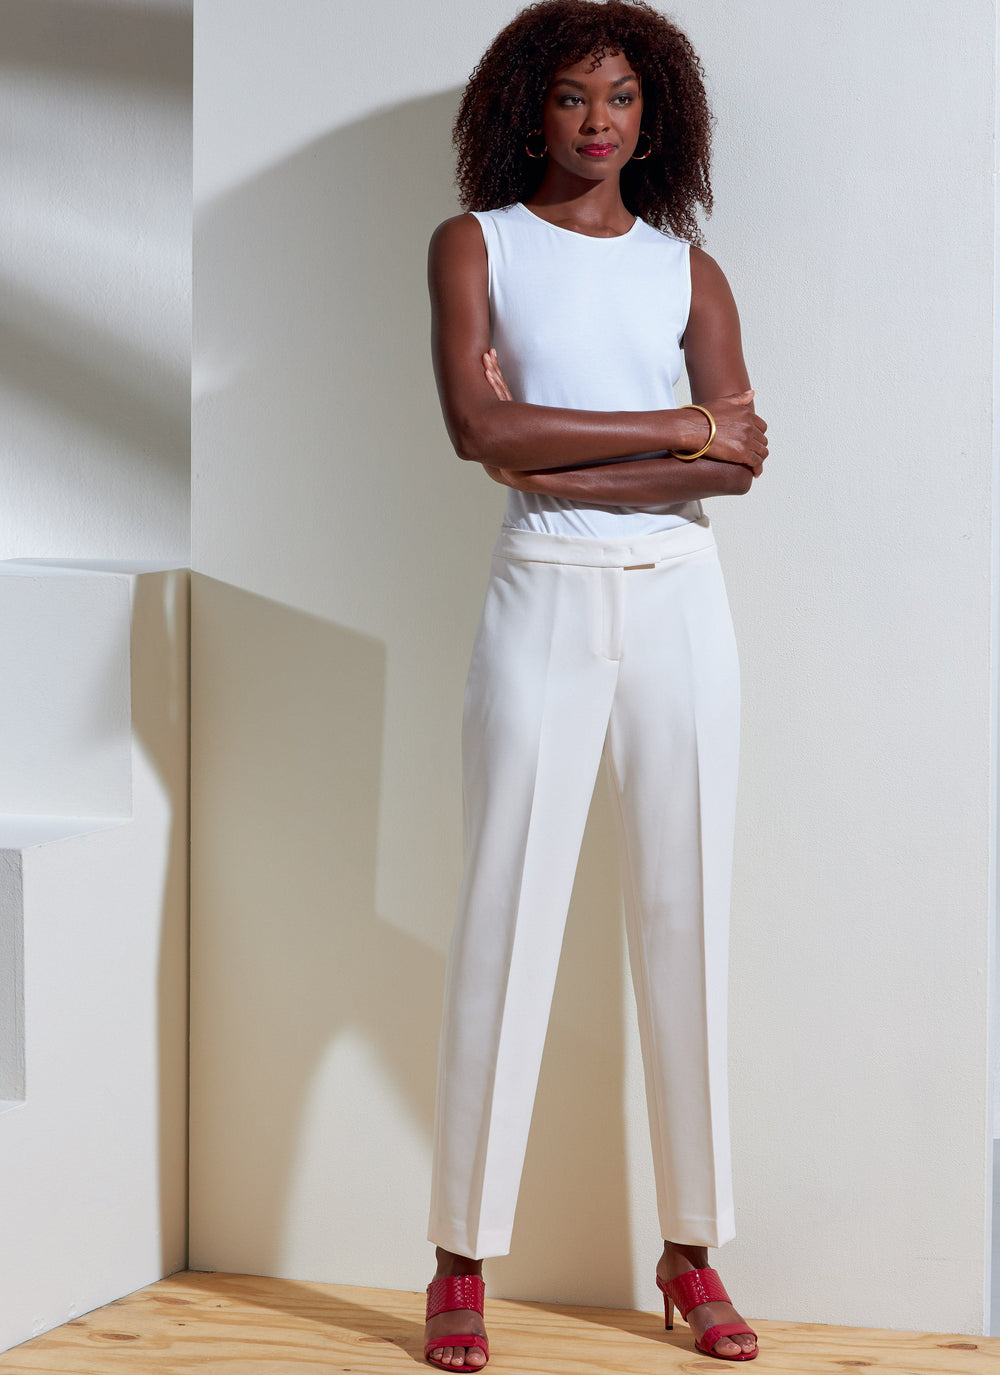 Vogue Sewing Pattern for Women's Pants, High Waisted Pants